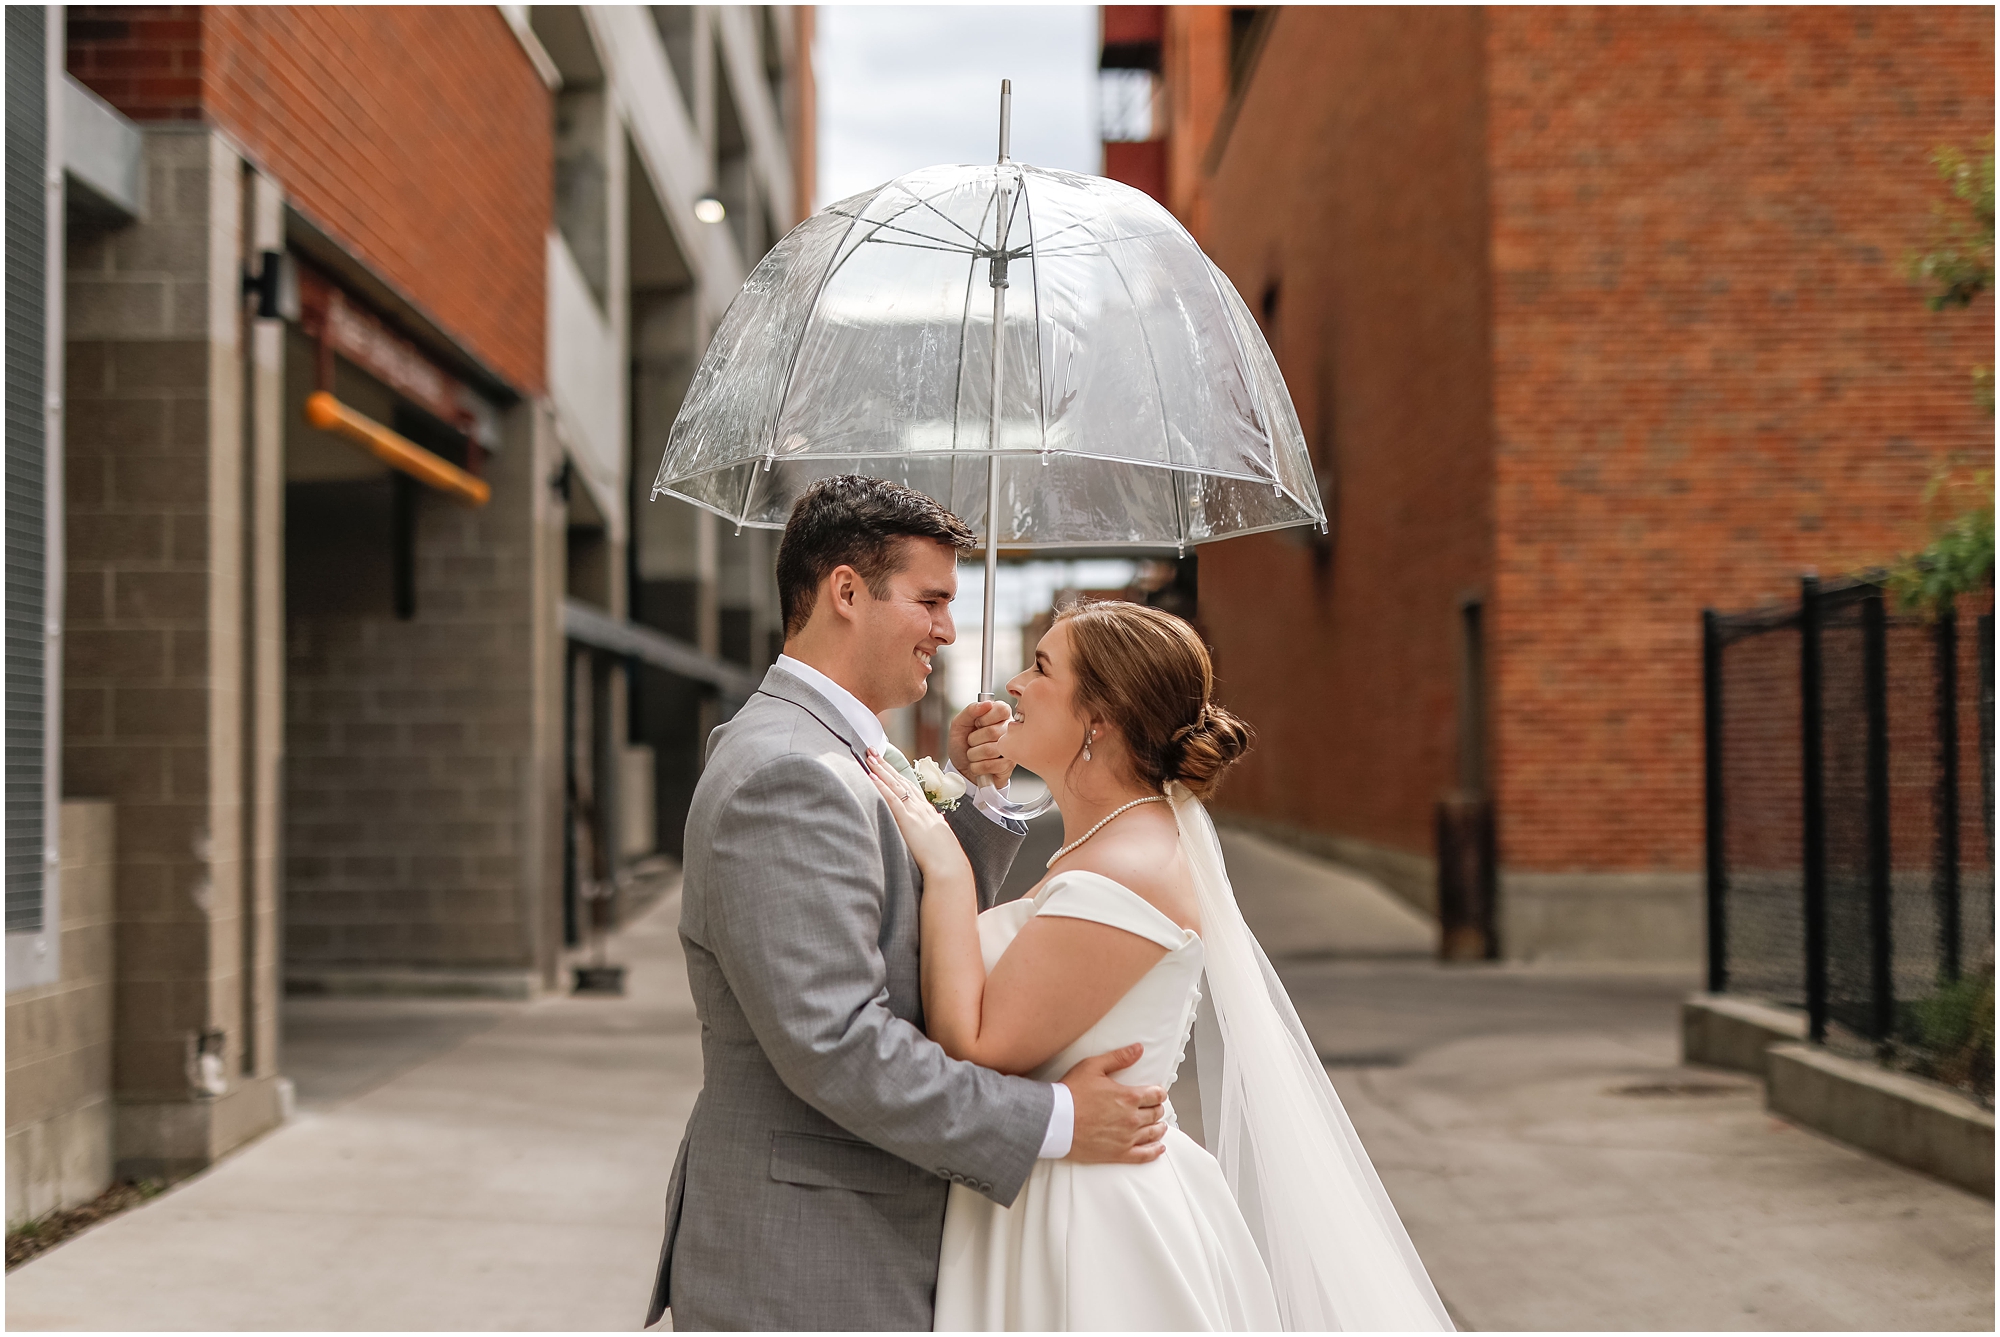 Bride and Groom in downtown Billings with umbrella